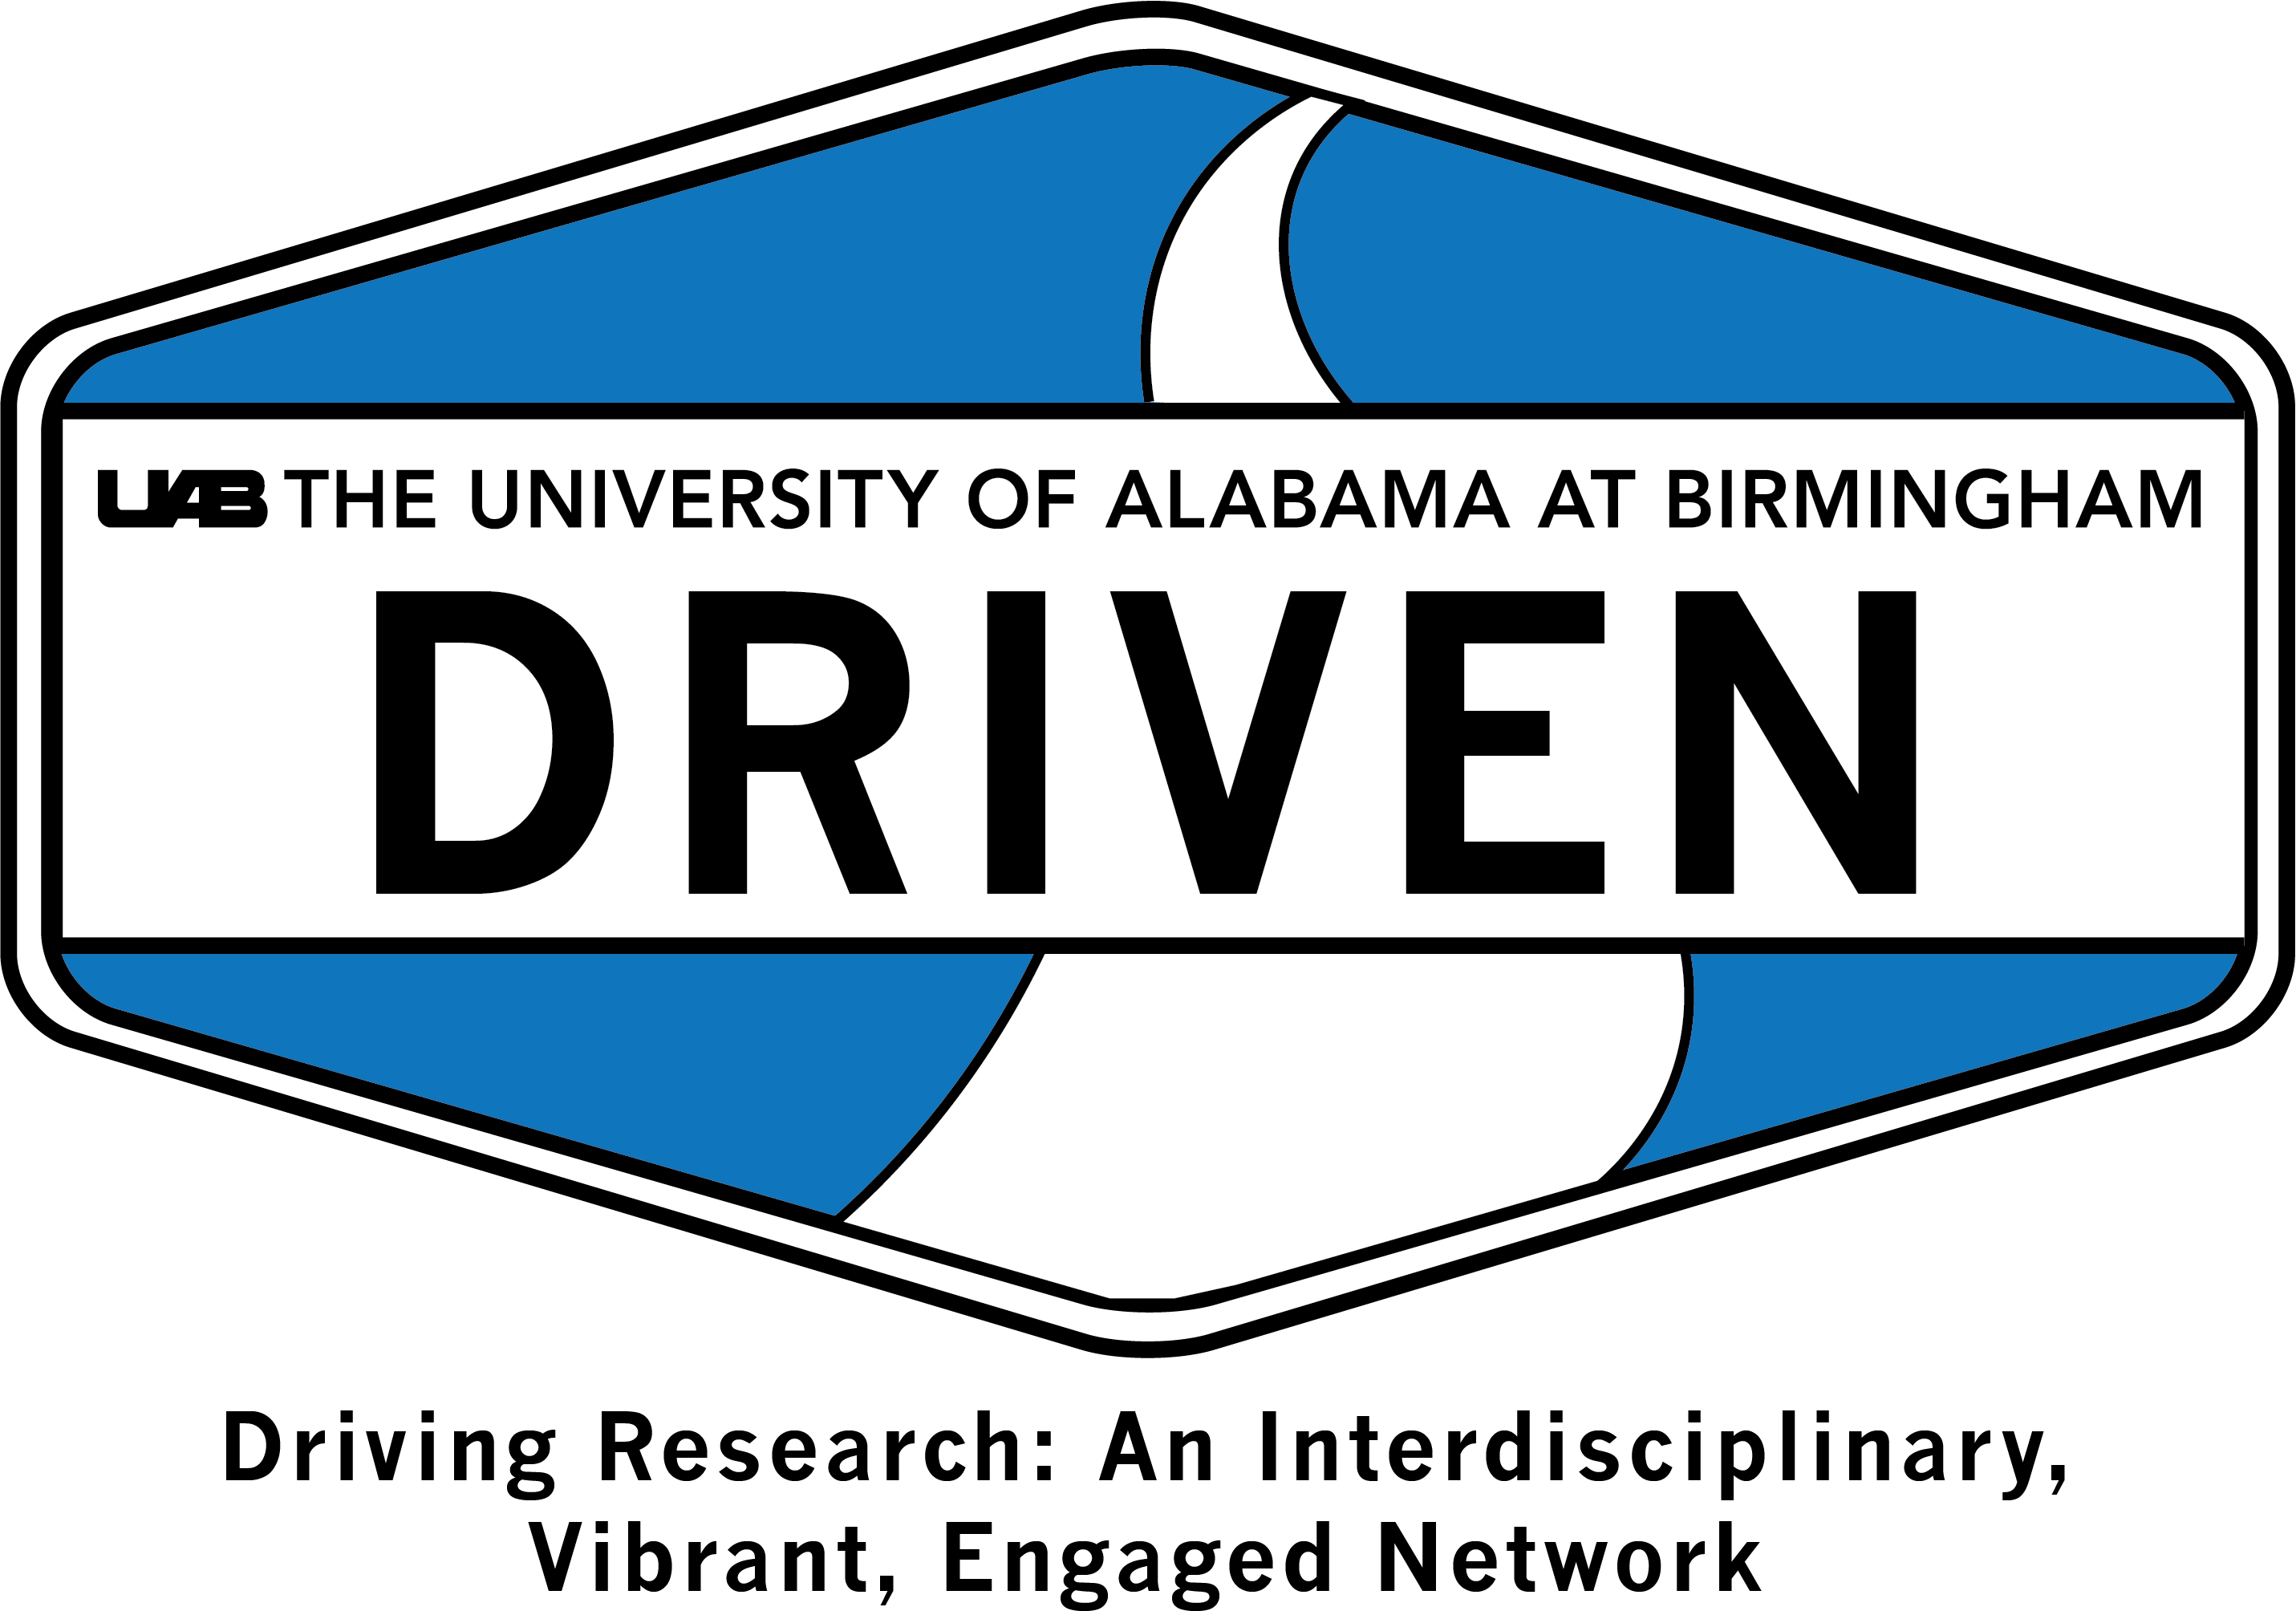 September Forum: Learn How DRIVEN Can Help Steer Your Career to Success